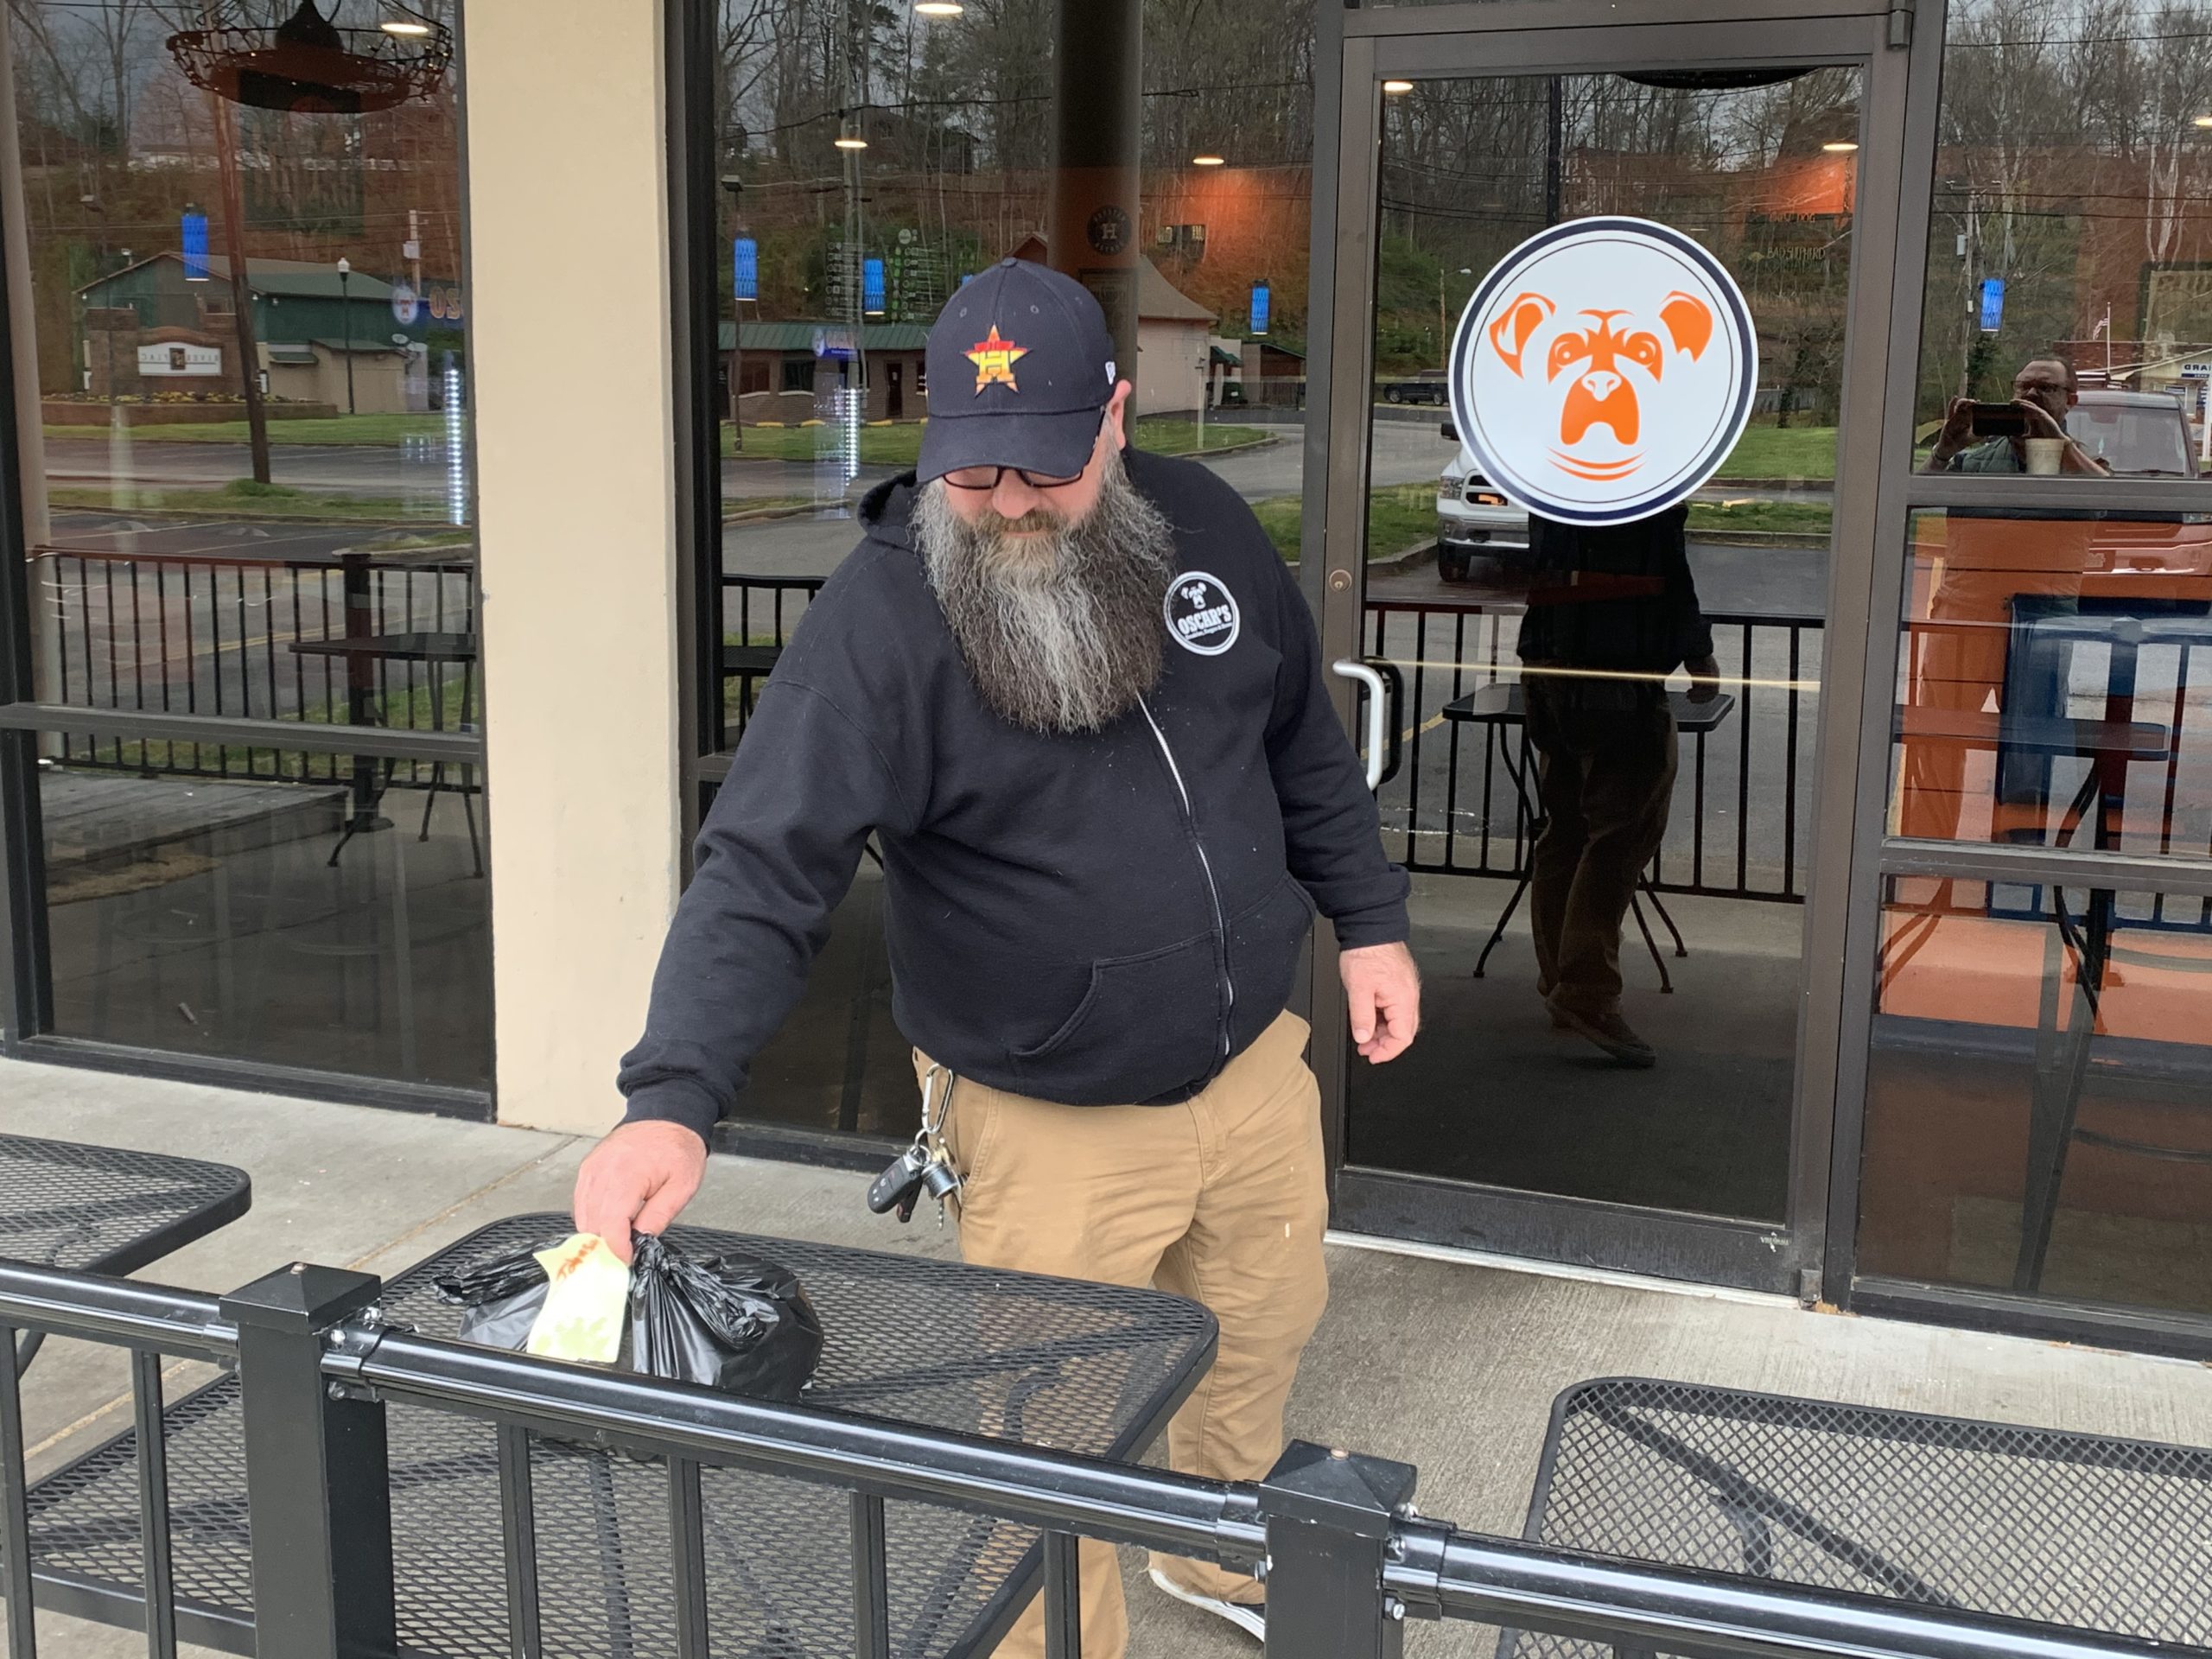 Jason Beter, owner of Oscar’s Breakfast, Burgers & Brews, places a curbside pickup order outside for a customer. Oscar’s has been one of the many Cabell County restaurants that developed curbside and delivery orders to meet the needs of their customers while protecting the health of their employees and customers.